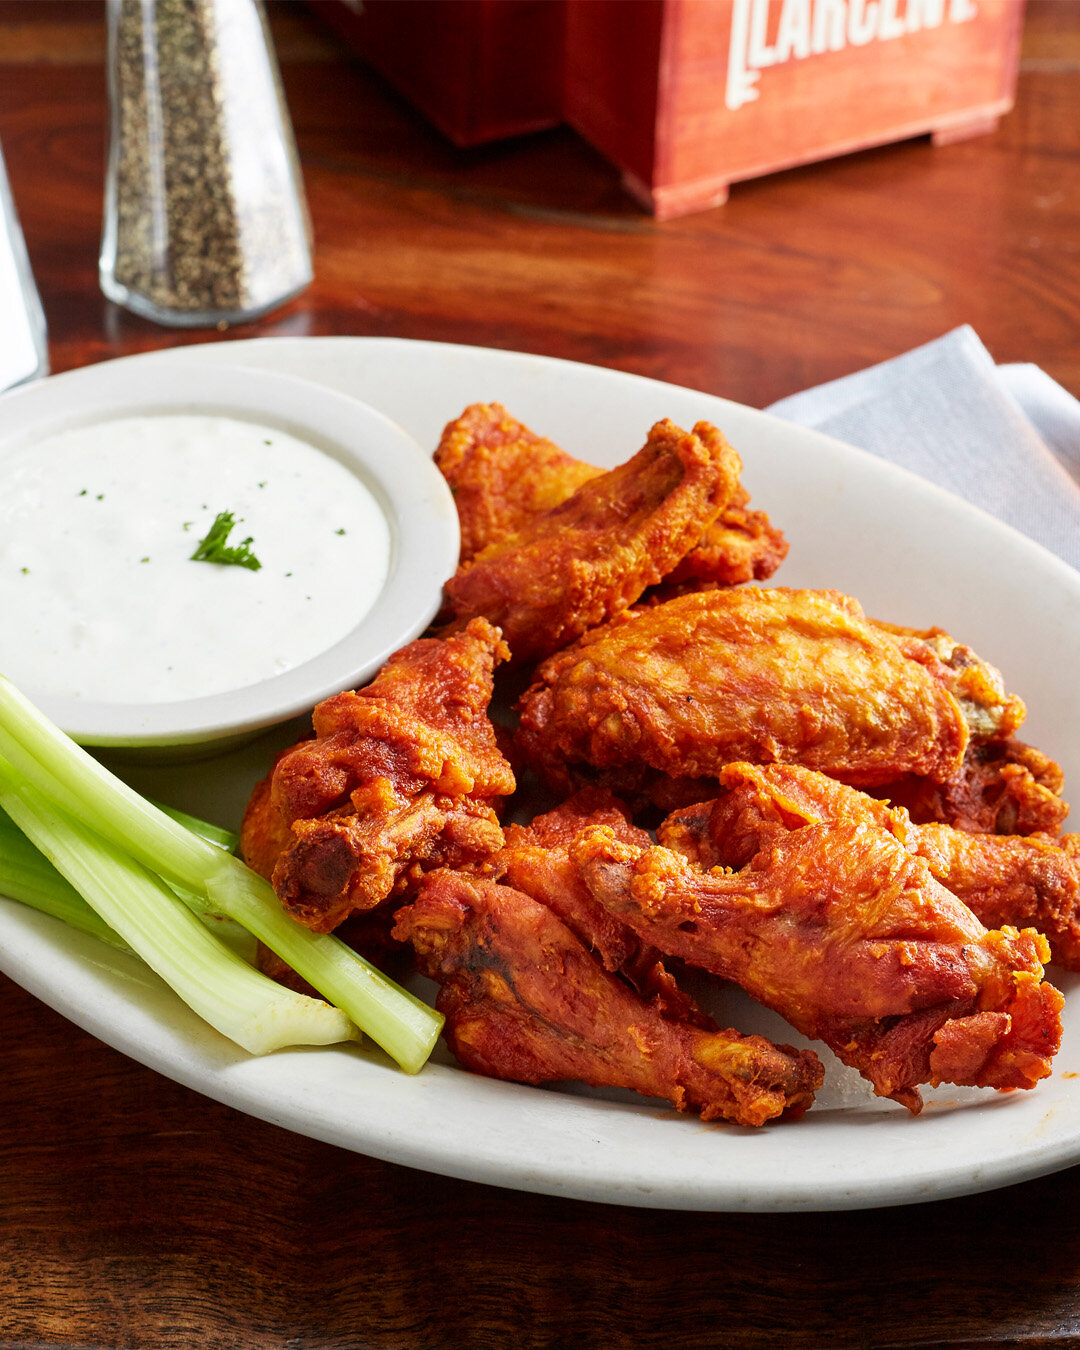 Bring the whole crew for a finger-lickin' good time at Ralph's Zucca Pizza! Don't miss out on our unbeatable deal of half-priced wings every Monday, all day long. We'll see you soon! 🍗🍴👨&zwj;👩&zwj;👧&zwj;👦

#FamilyFriendlyEats #HalfPricedWings #